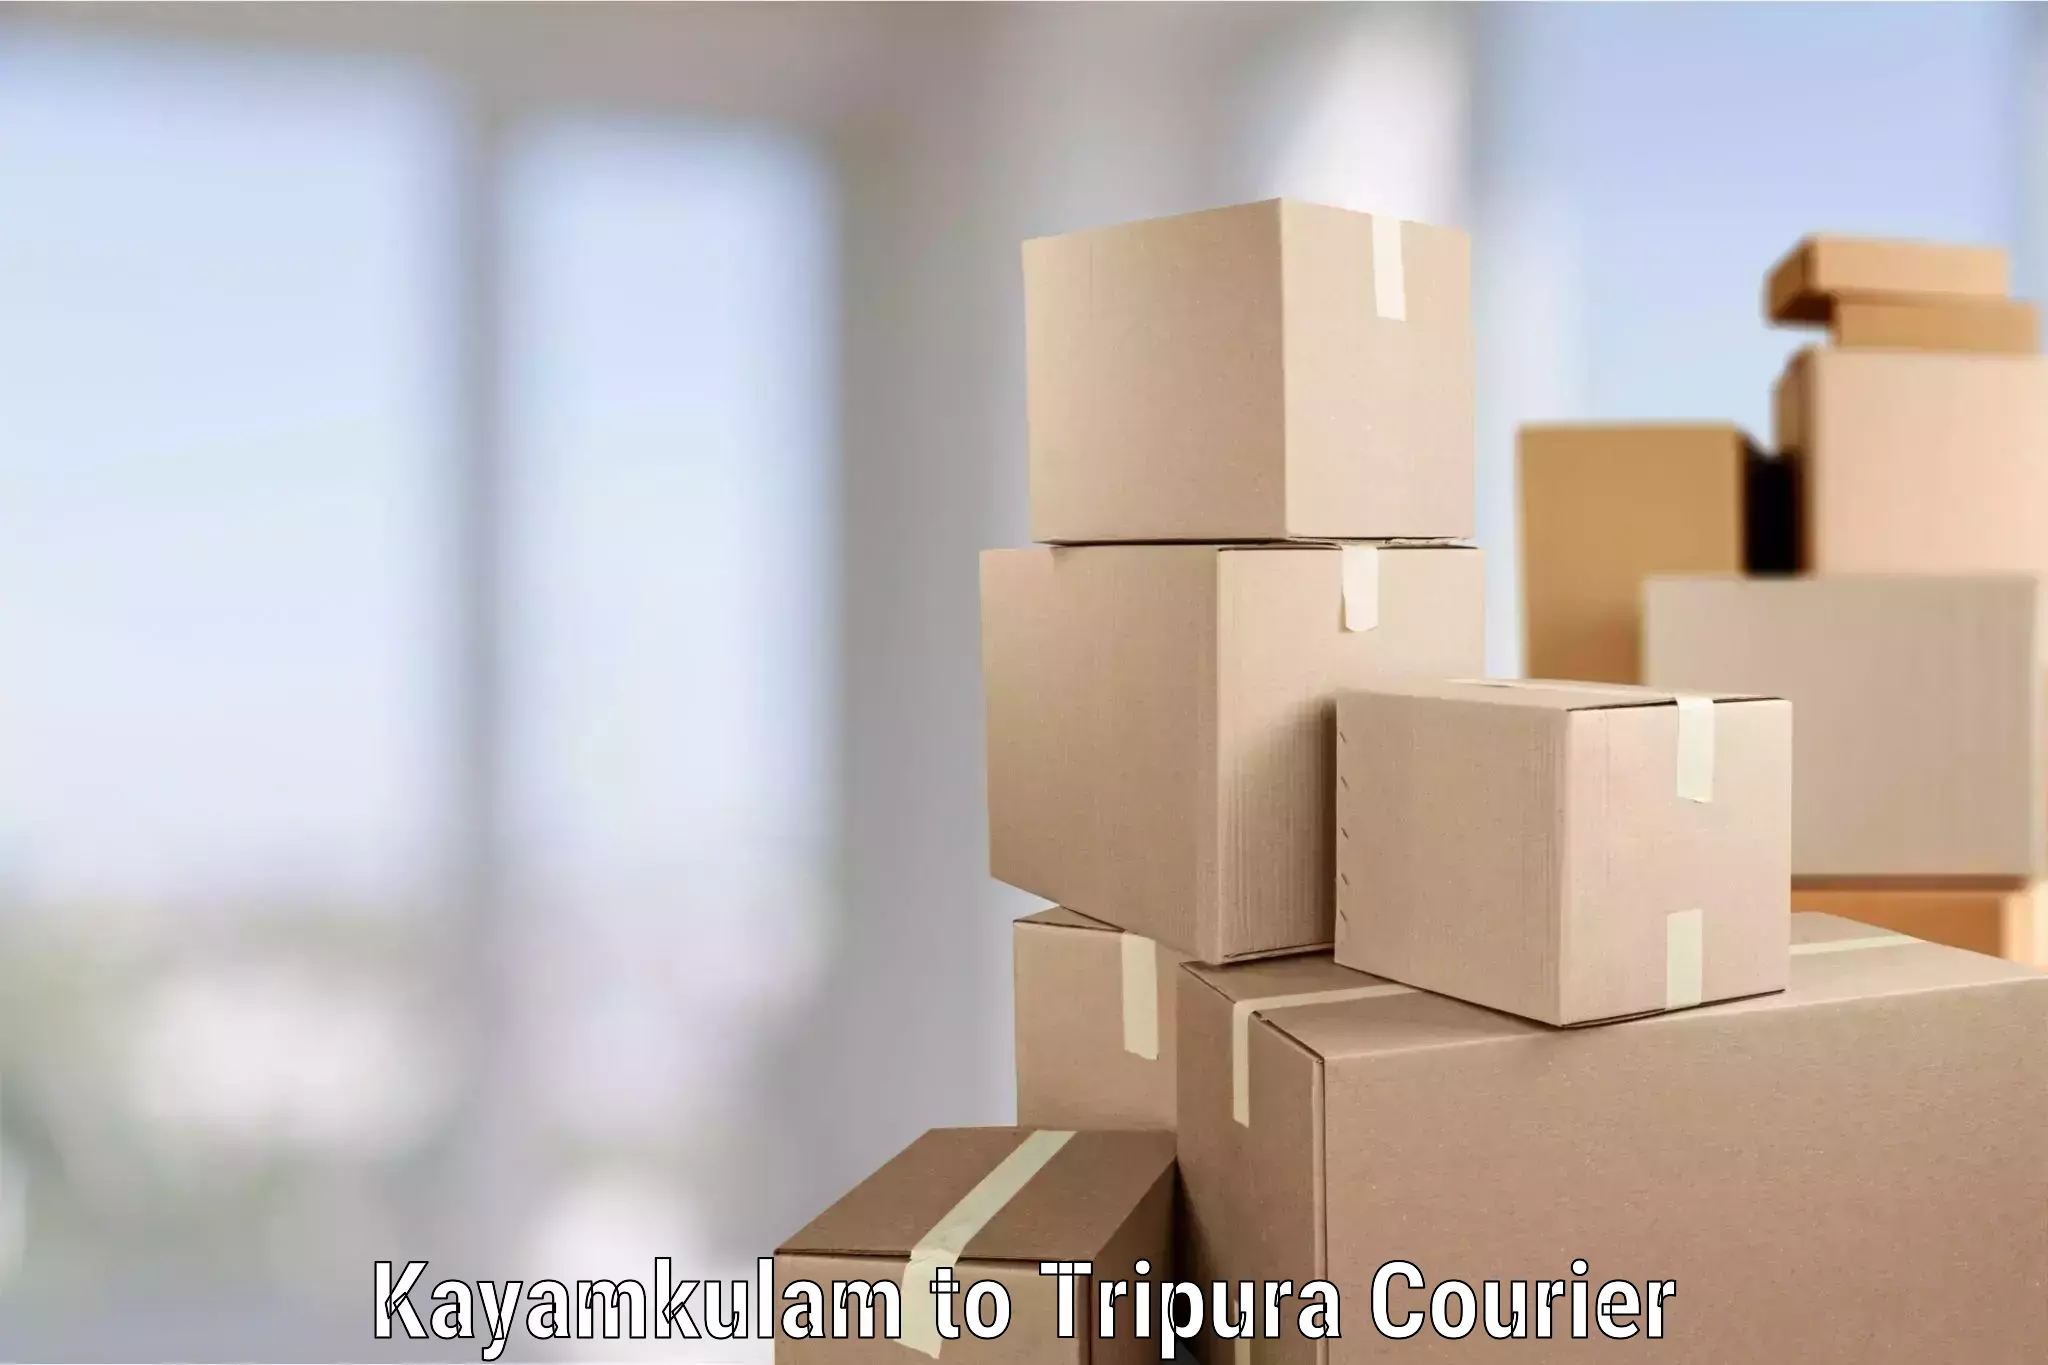 Local moving services in Kayamkulam to Tripura